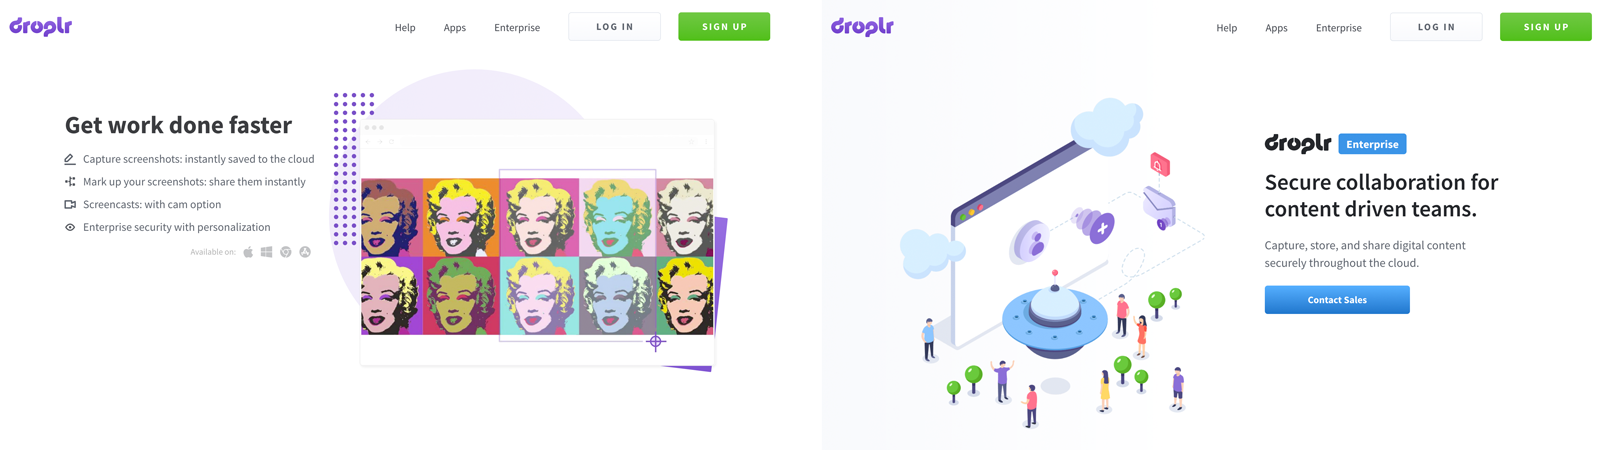 Droplr homepage and enterprise landing page